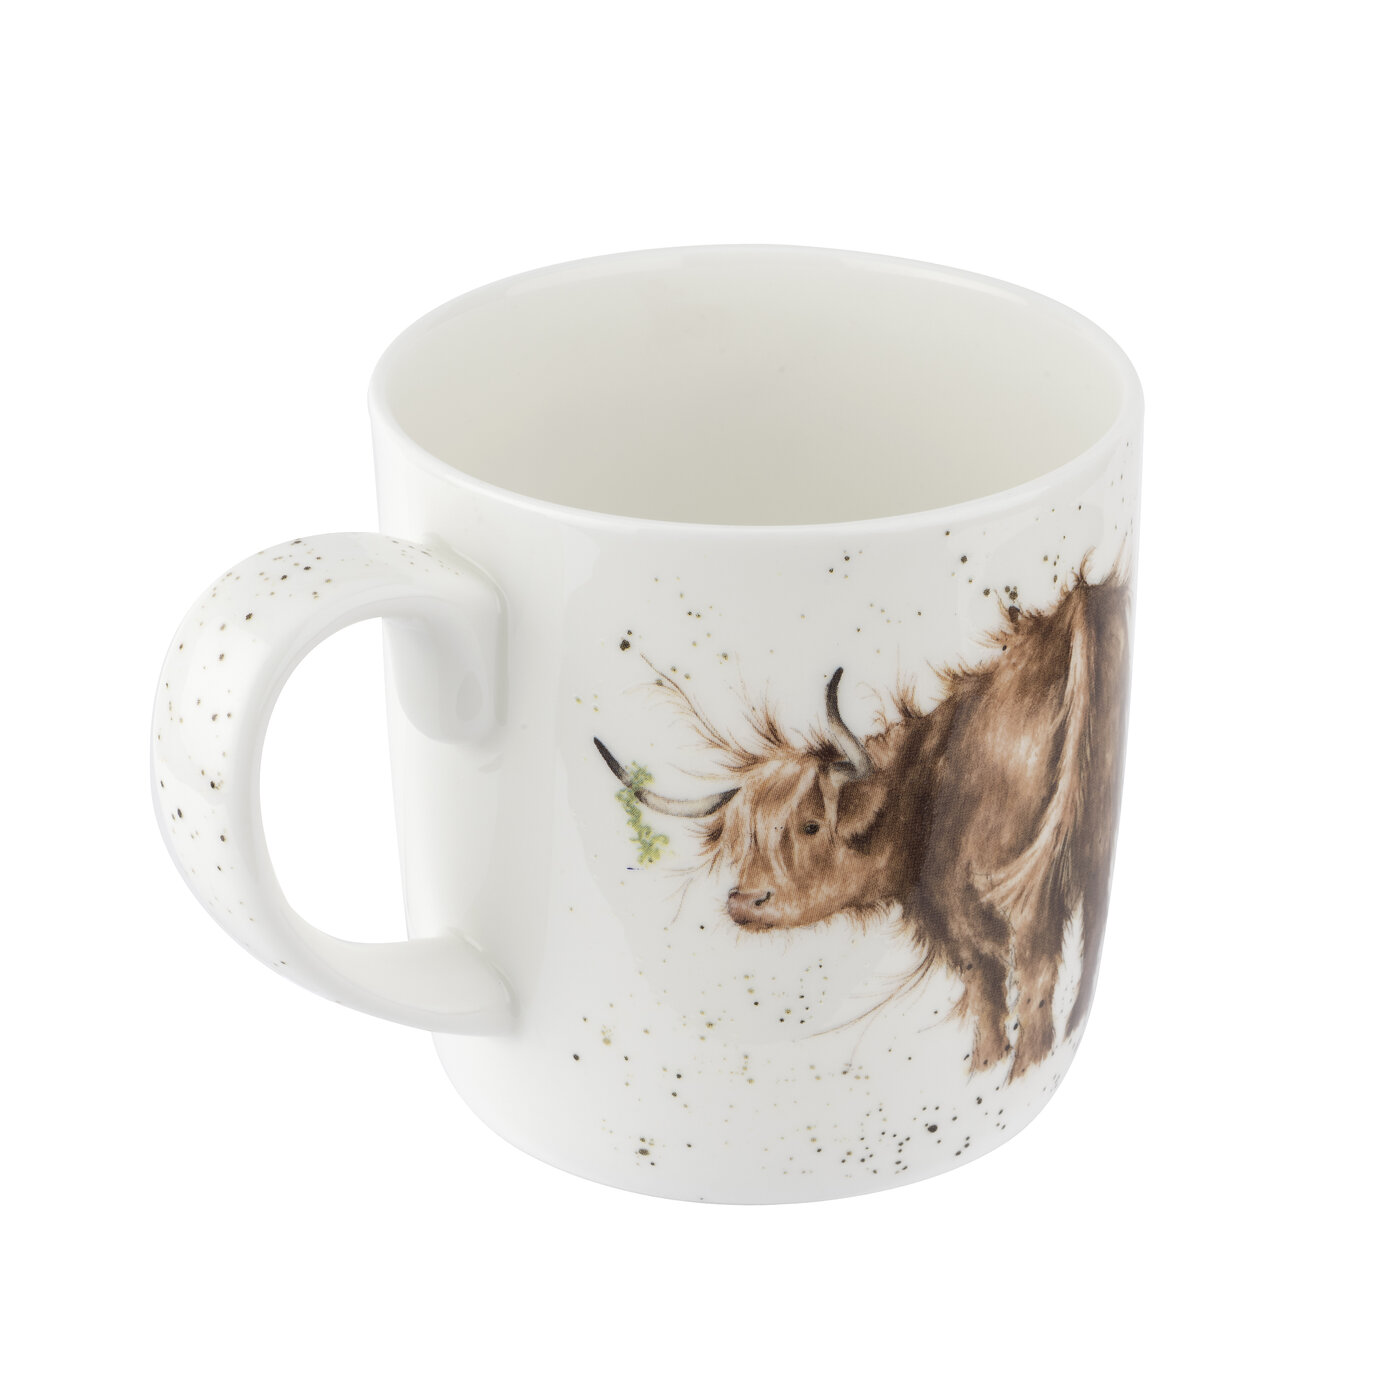 Wrendale Designs Daisy-Coo 14 fl.oz. Mug, Cow image number null